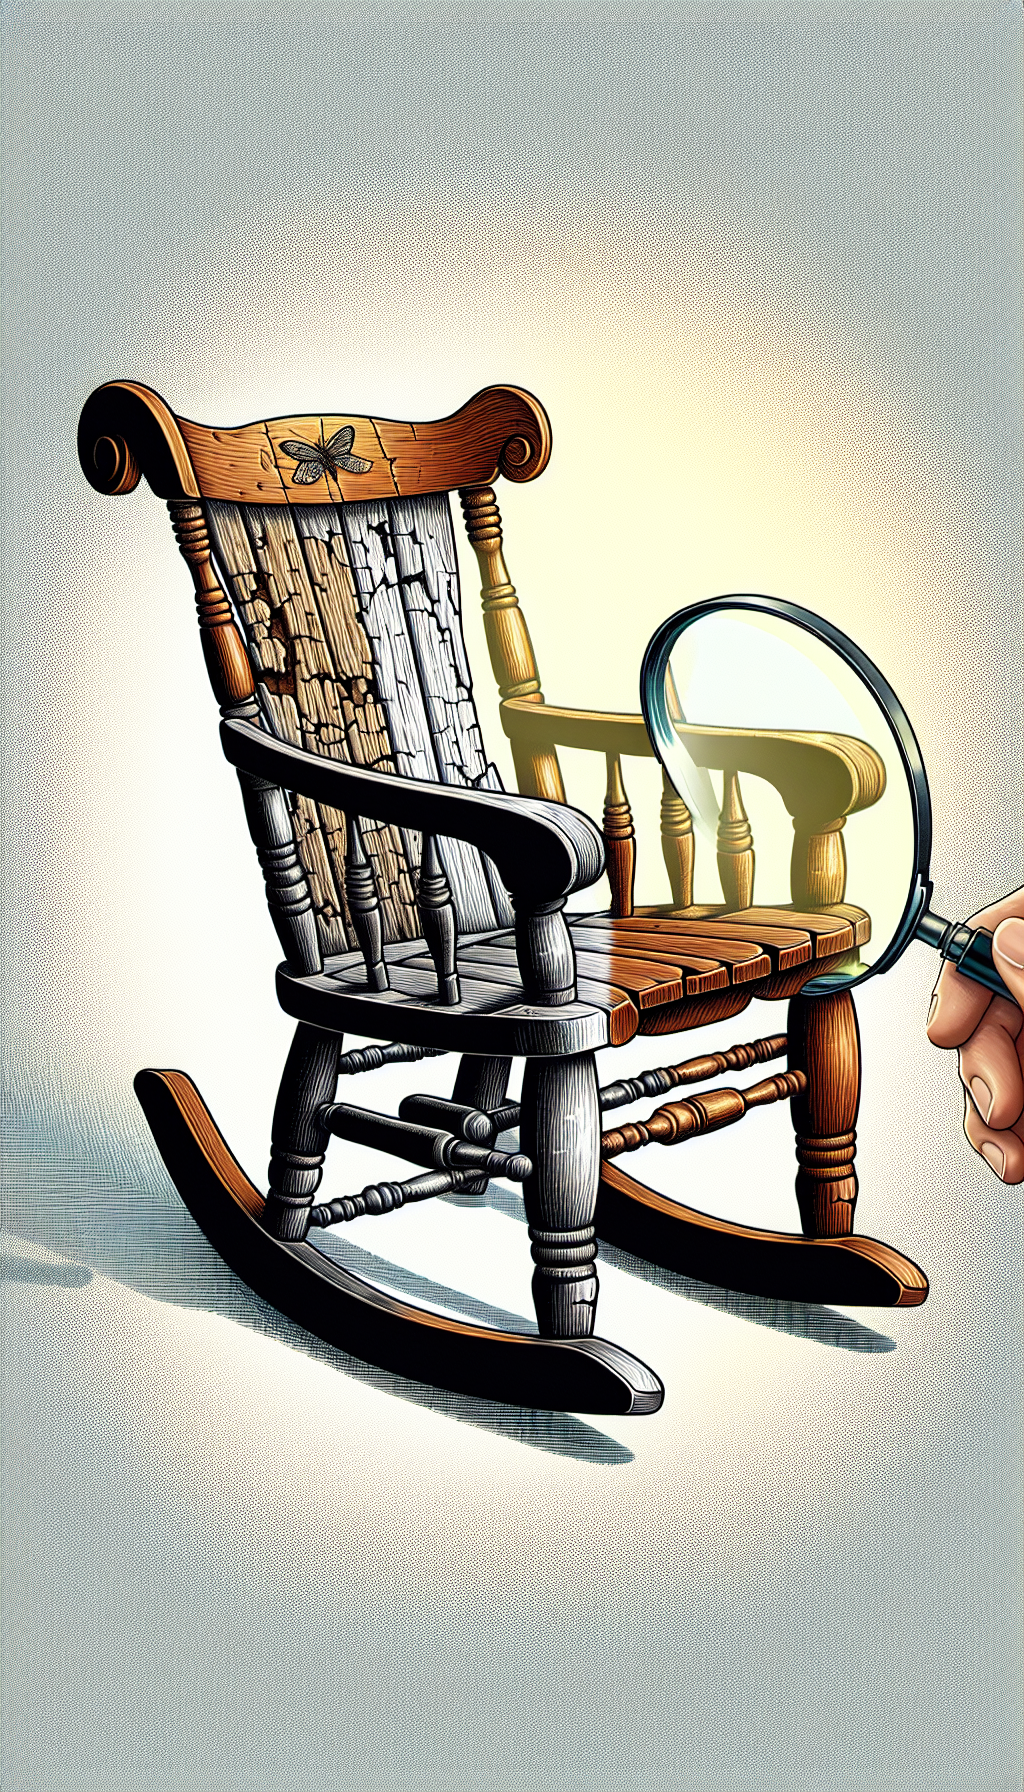 An illustration merges two halves of a rocking chair, one side aged and splintered, the other restored and polished, joined at the middle in a puzzle fit. An antique appraiser's magnifying glass looms over, examining the fine line where conditions diverge. The styles switch between a textured, faded look and a sleek, vibrant finish to emphasize the contrast in value assessment.